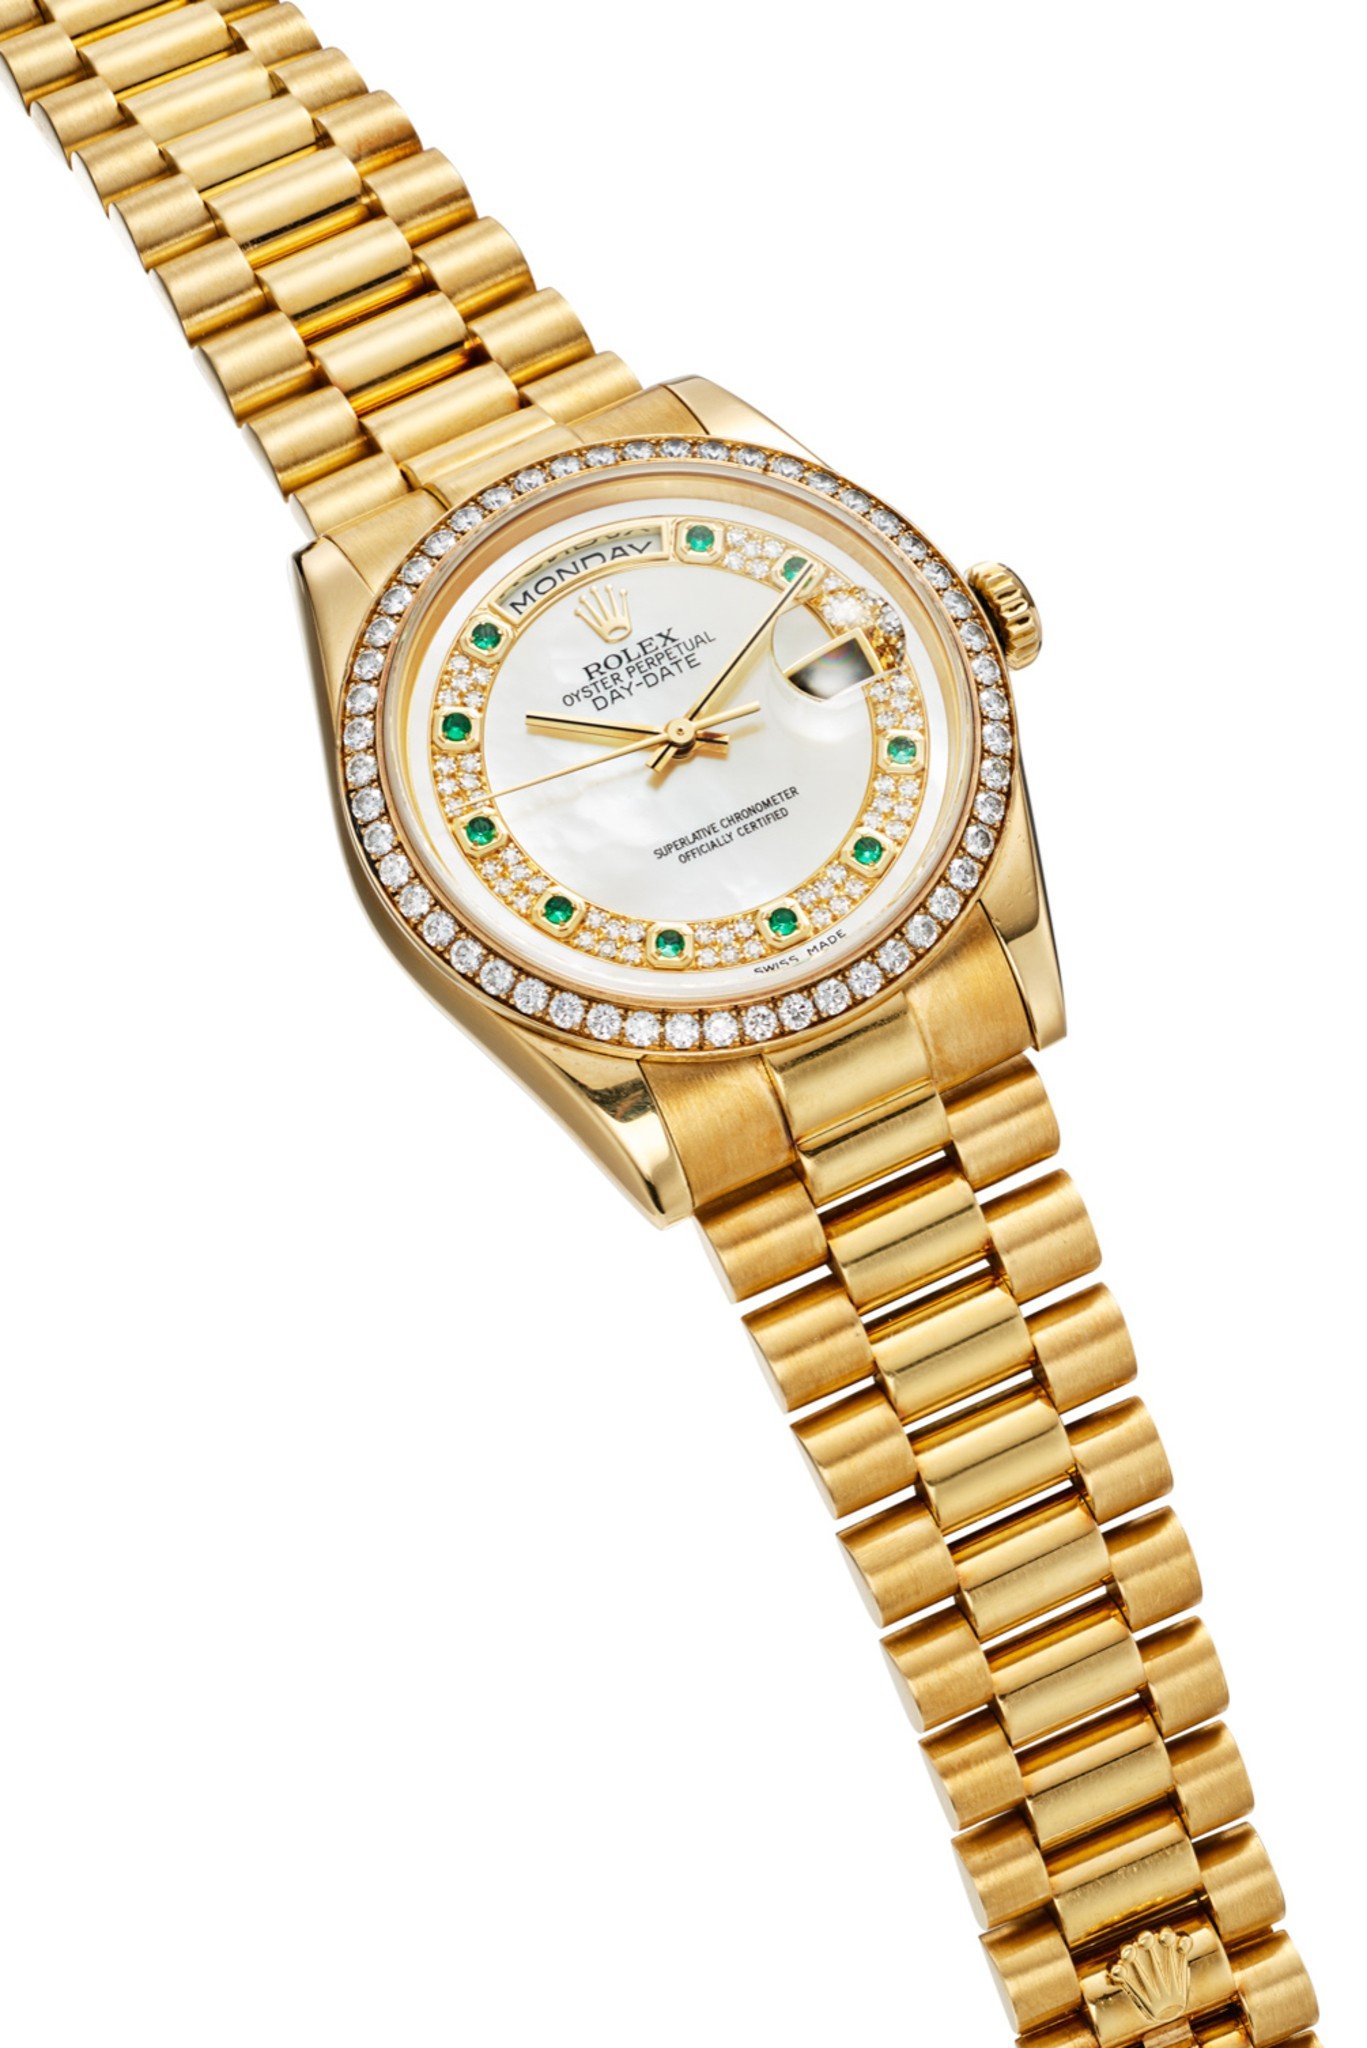 The Rolex Day-Date is known as ‘the president’s watch’.